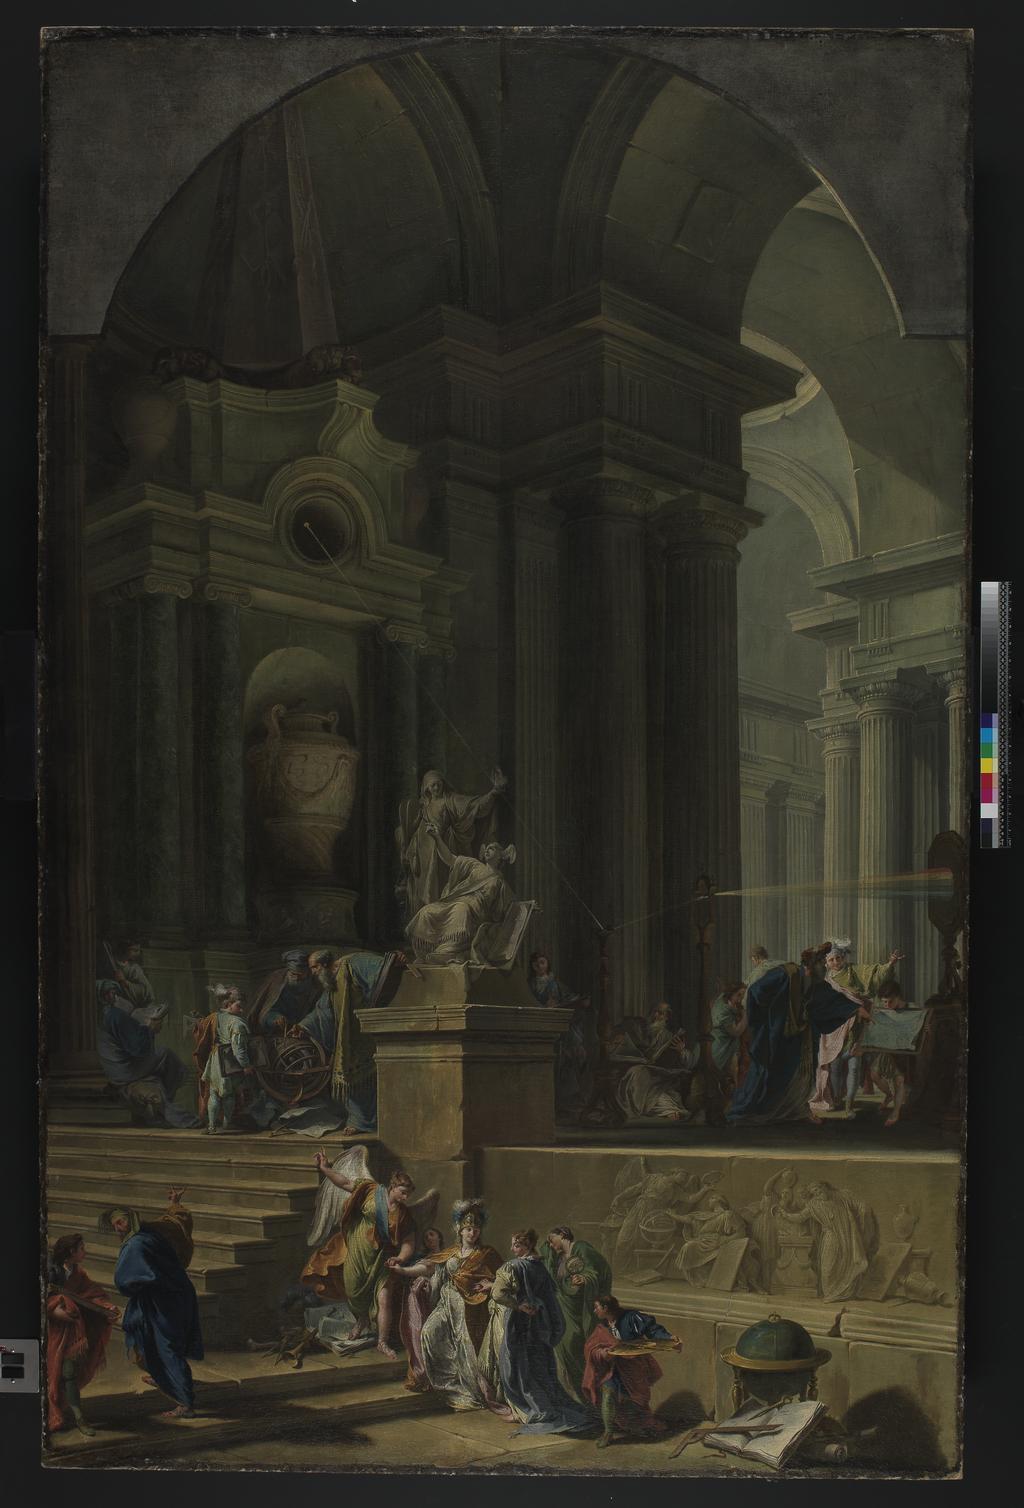 An image of An allegorical monument to Sir Isaac Newton. Pittoni, Giovanni Battista, the younger (1687-1767), Valeriani, Domenico (Italian, op.1700-m.a.1771), Valeriani, Giuseppe (Italian, op.1742-m.1761). Oil on canvas, height (painted area) 220 cm, width (painted area) 139 cm, 1727 to 1729.